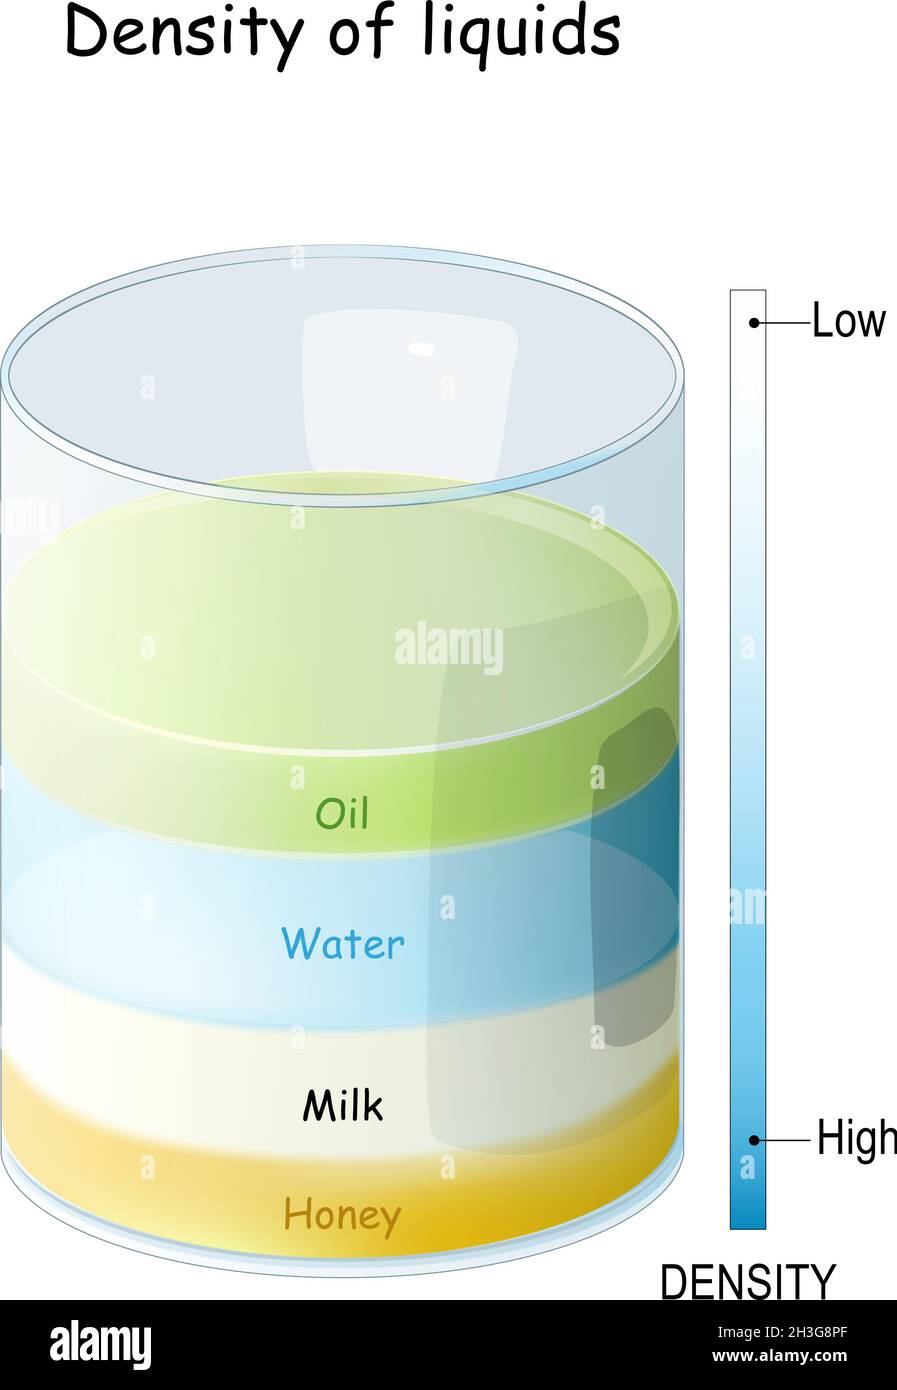 https://c8.alamy.com/comp/2H3G8PF/density-of-liquids-from-honey-and-milk-with-high-density-to-water-and-oil-with-low-density-a-glass-cylinder-containing-various-colored-liquids-2H3G8PF.jpg